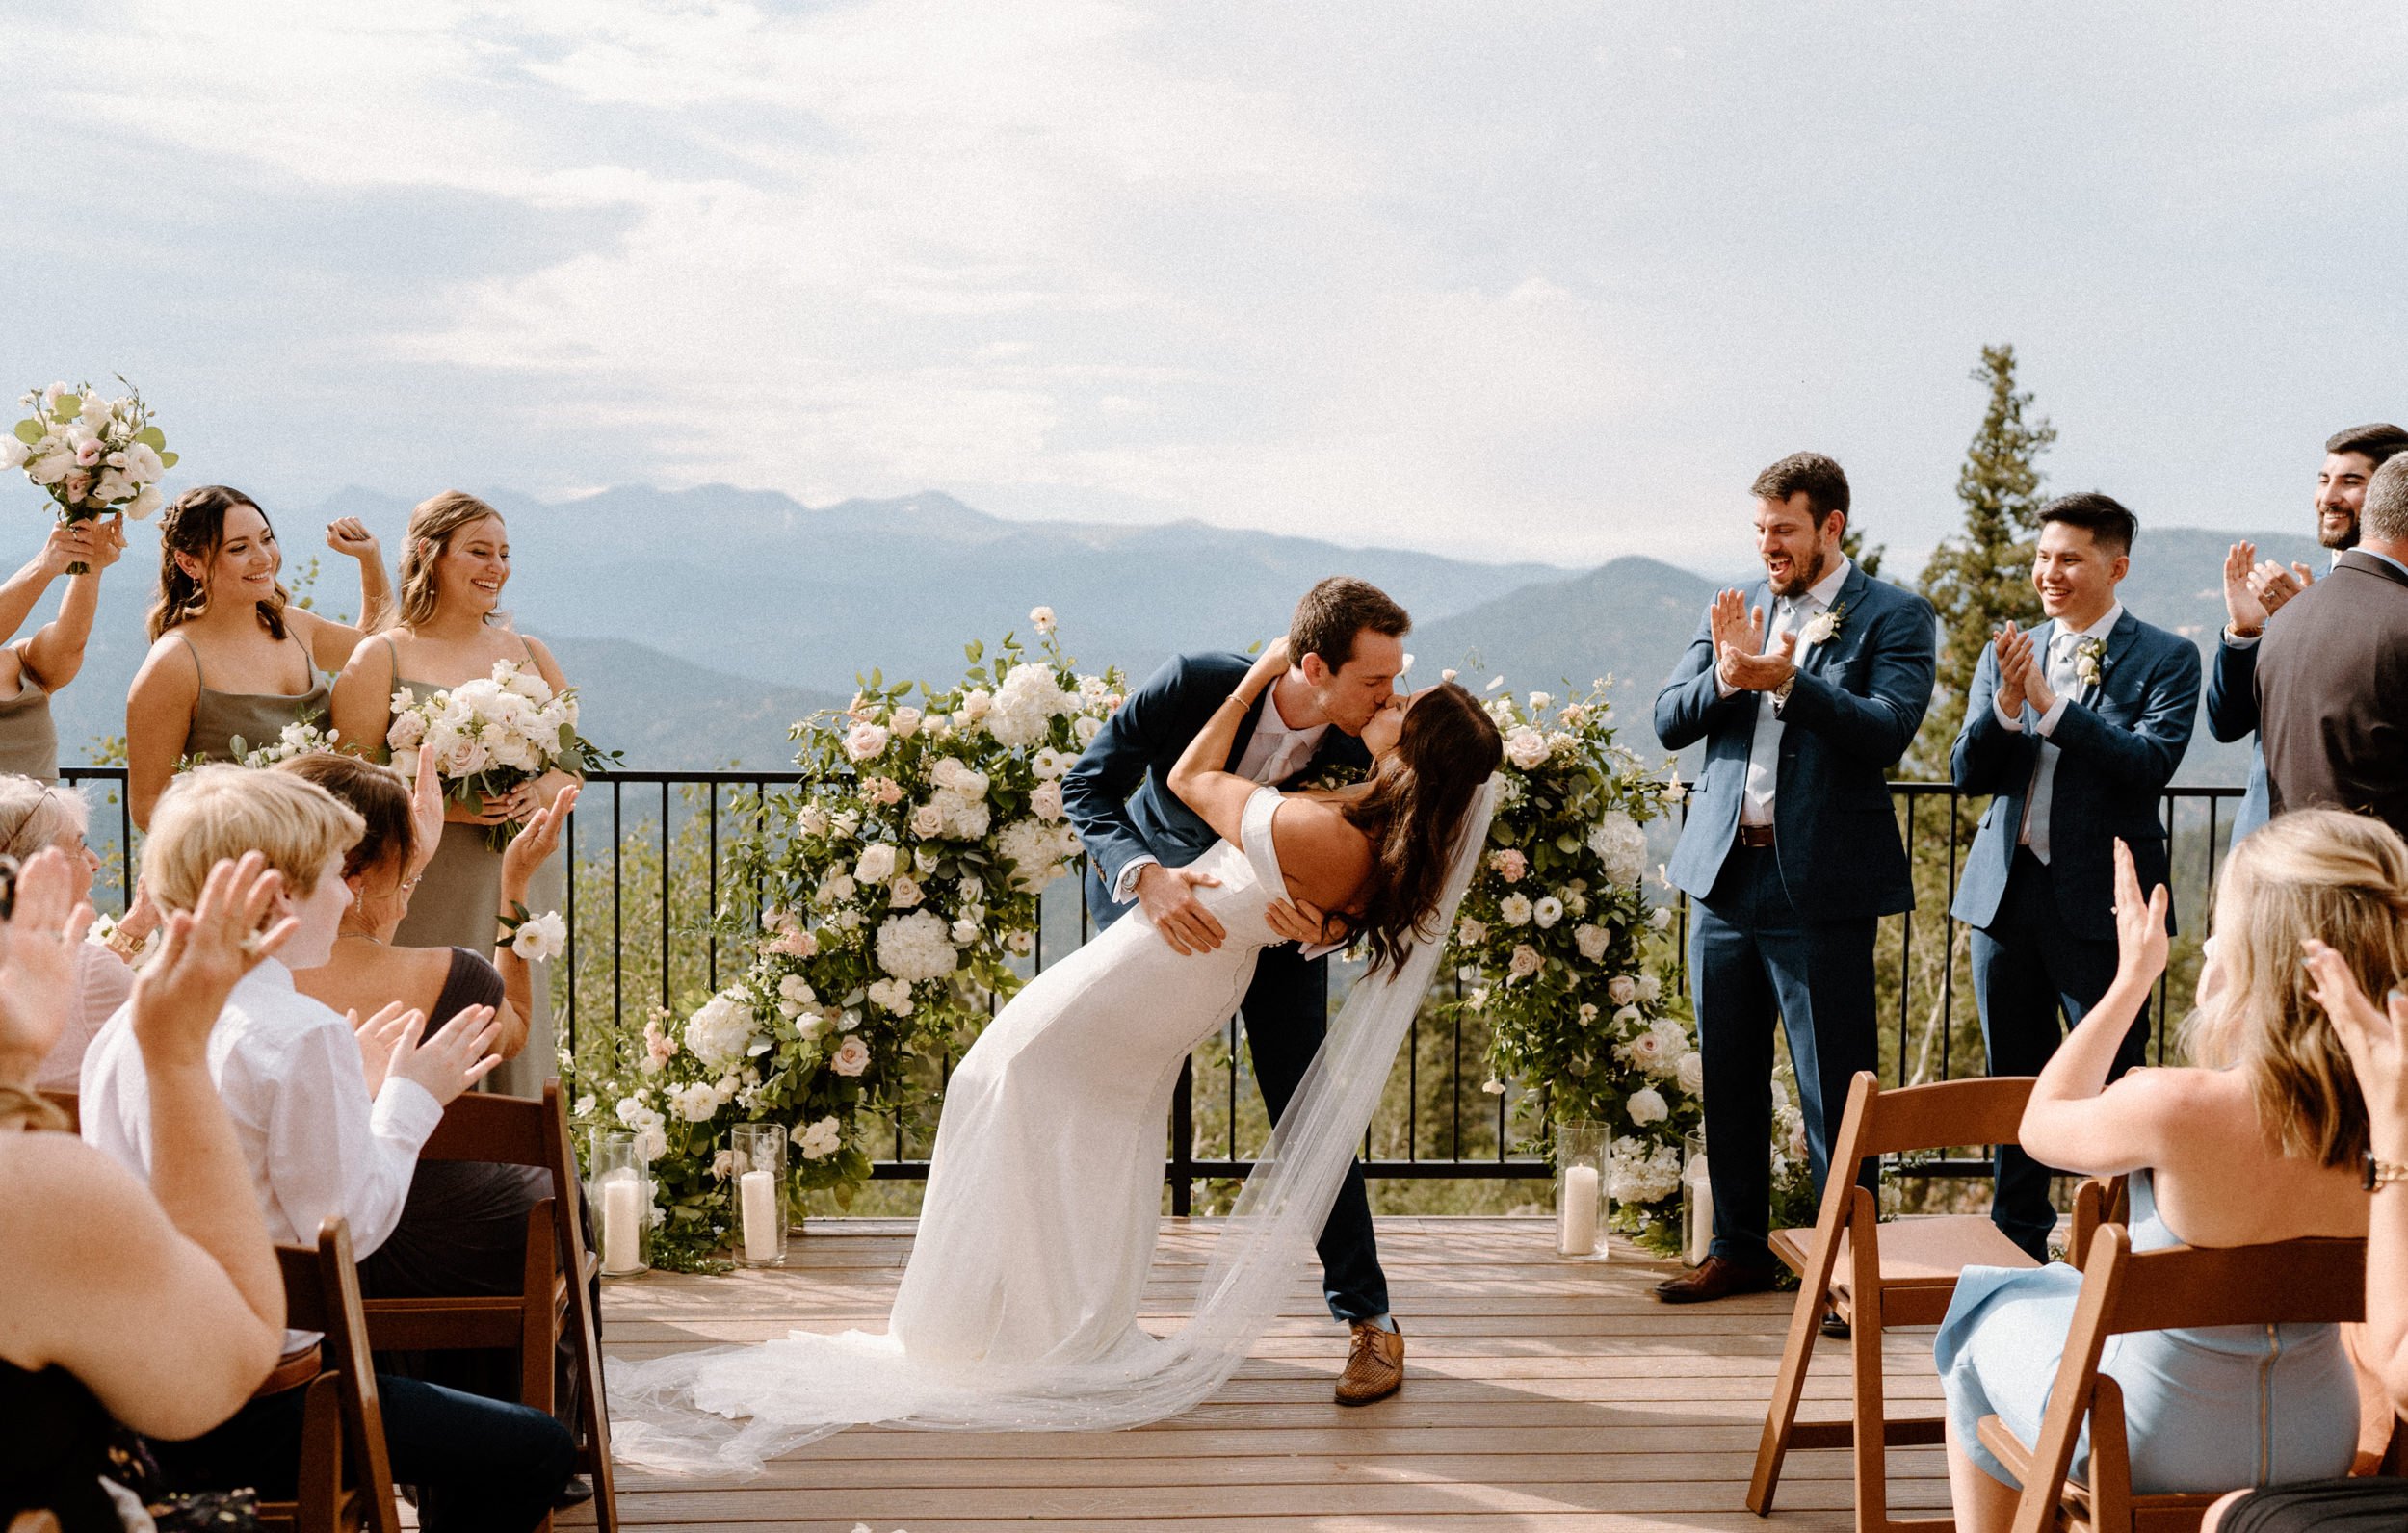 The groom dips the bride for their first kiss at North Star Gatherings in Idaho Springs, CO